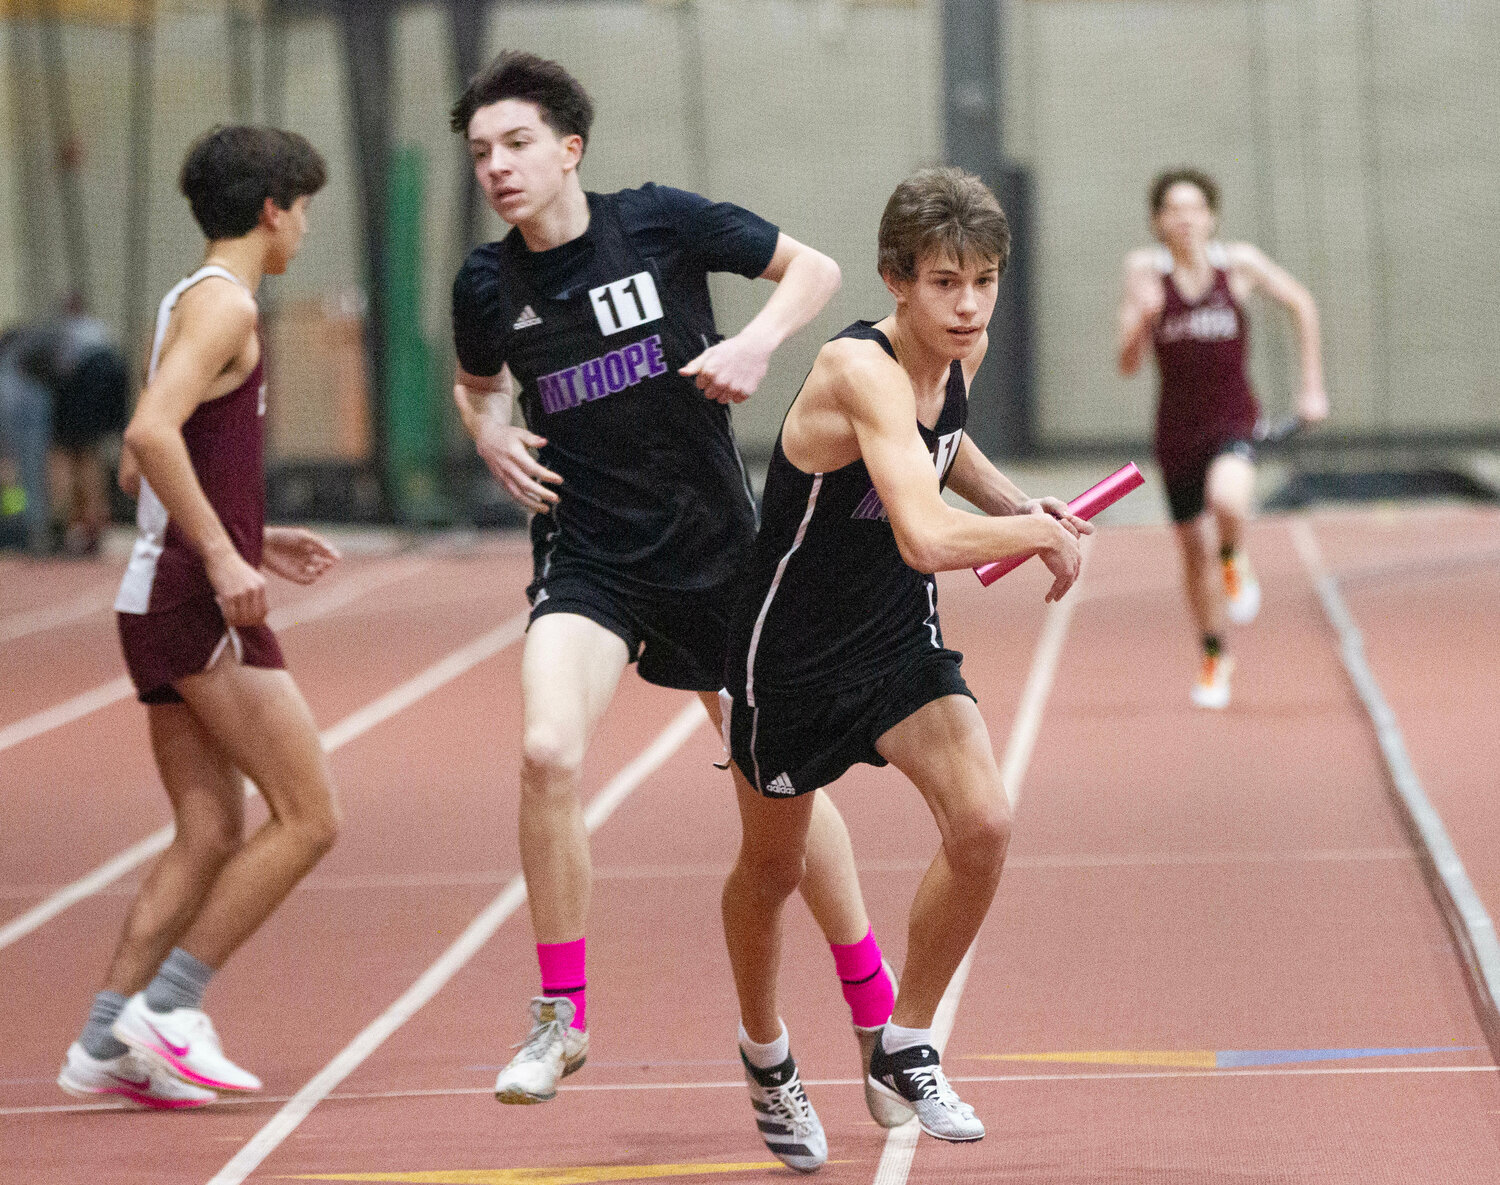 Andy Charest hands the baton to Jackson Lopes during the 4x800 meter run.